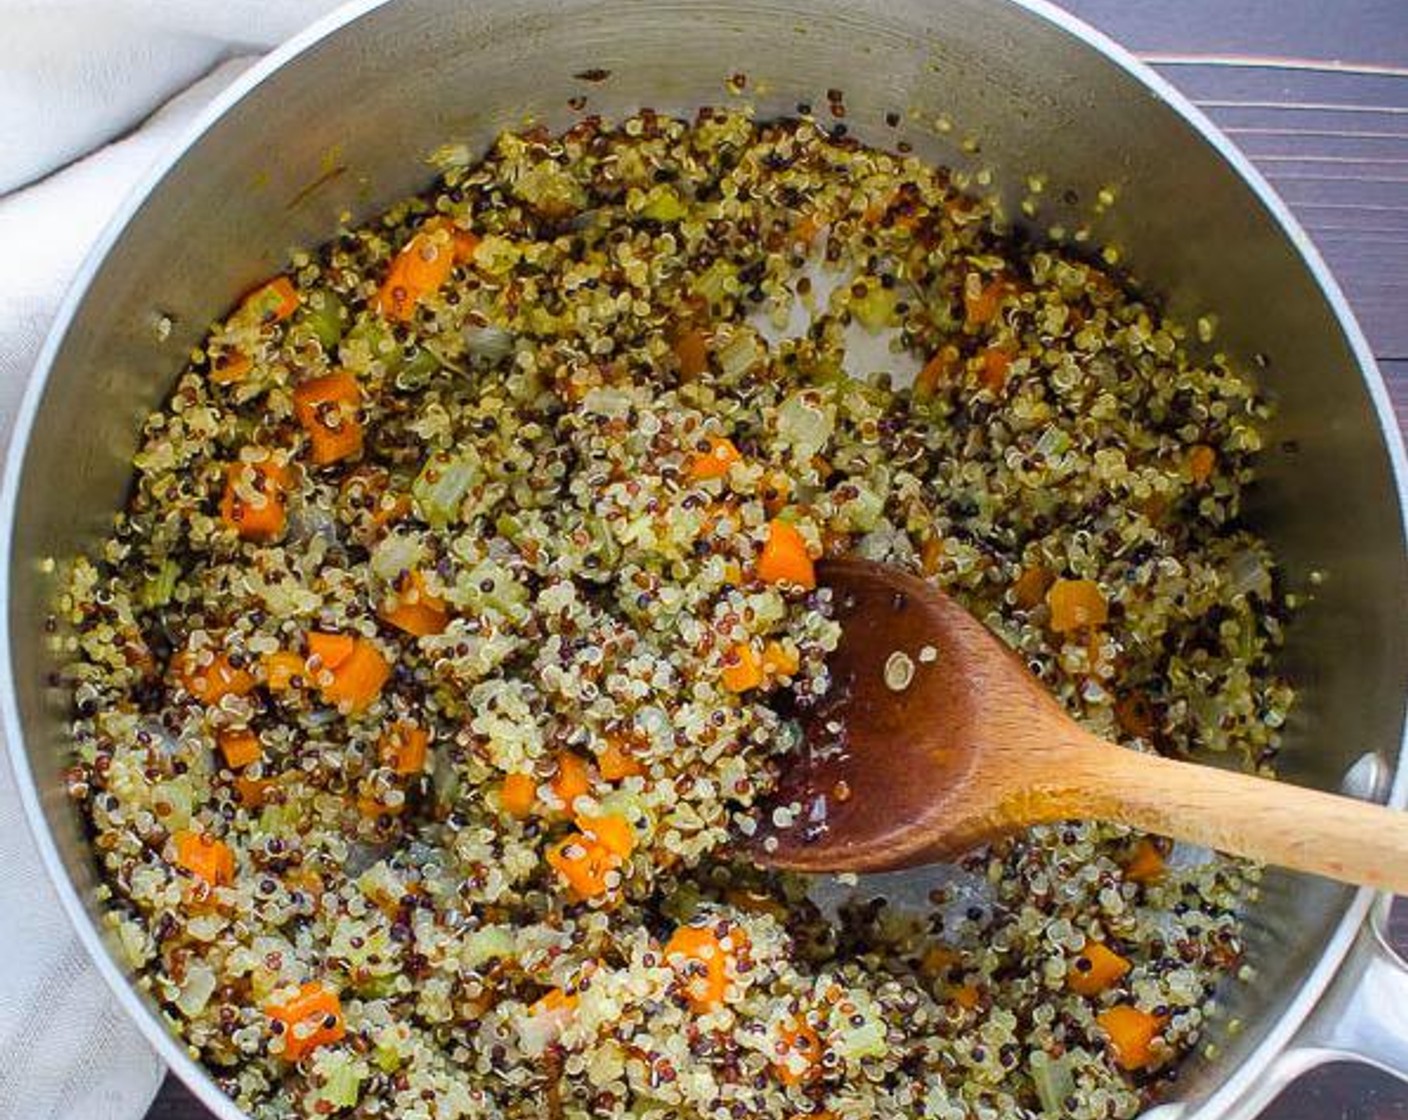 step 4 Cover pot with a lid and reduce heat to low. Simmer for 15 minutes until quinoa is tender and has given off its little spiral germ. While quinoa and lentils cook, make the shallots vinaigrette.